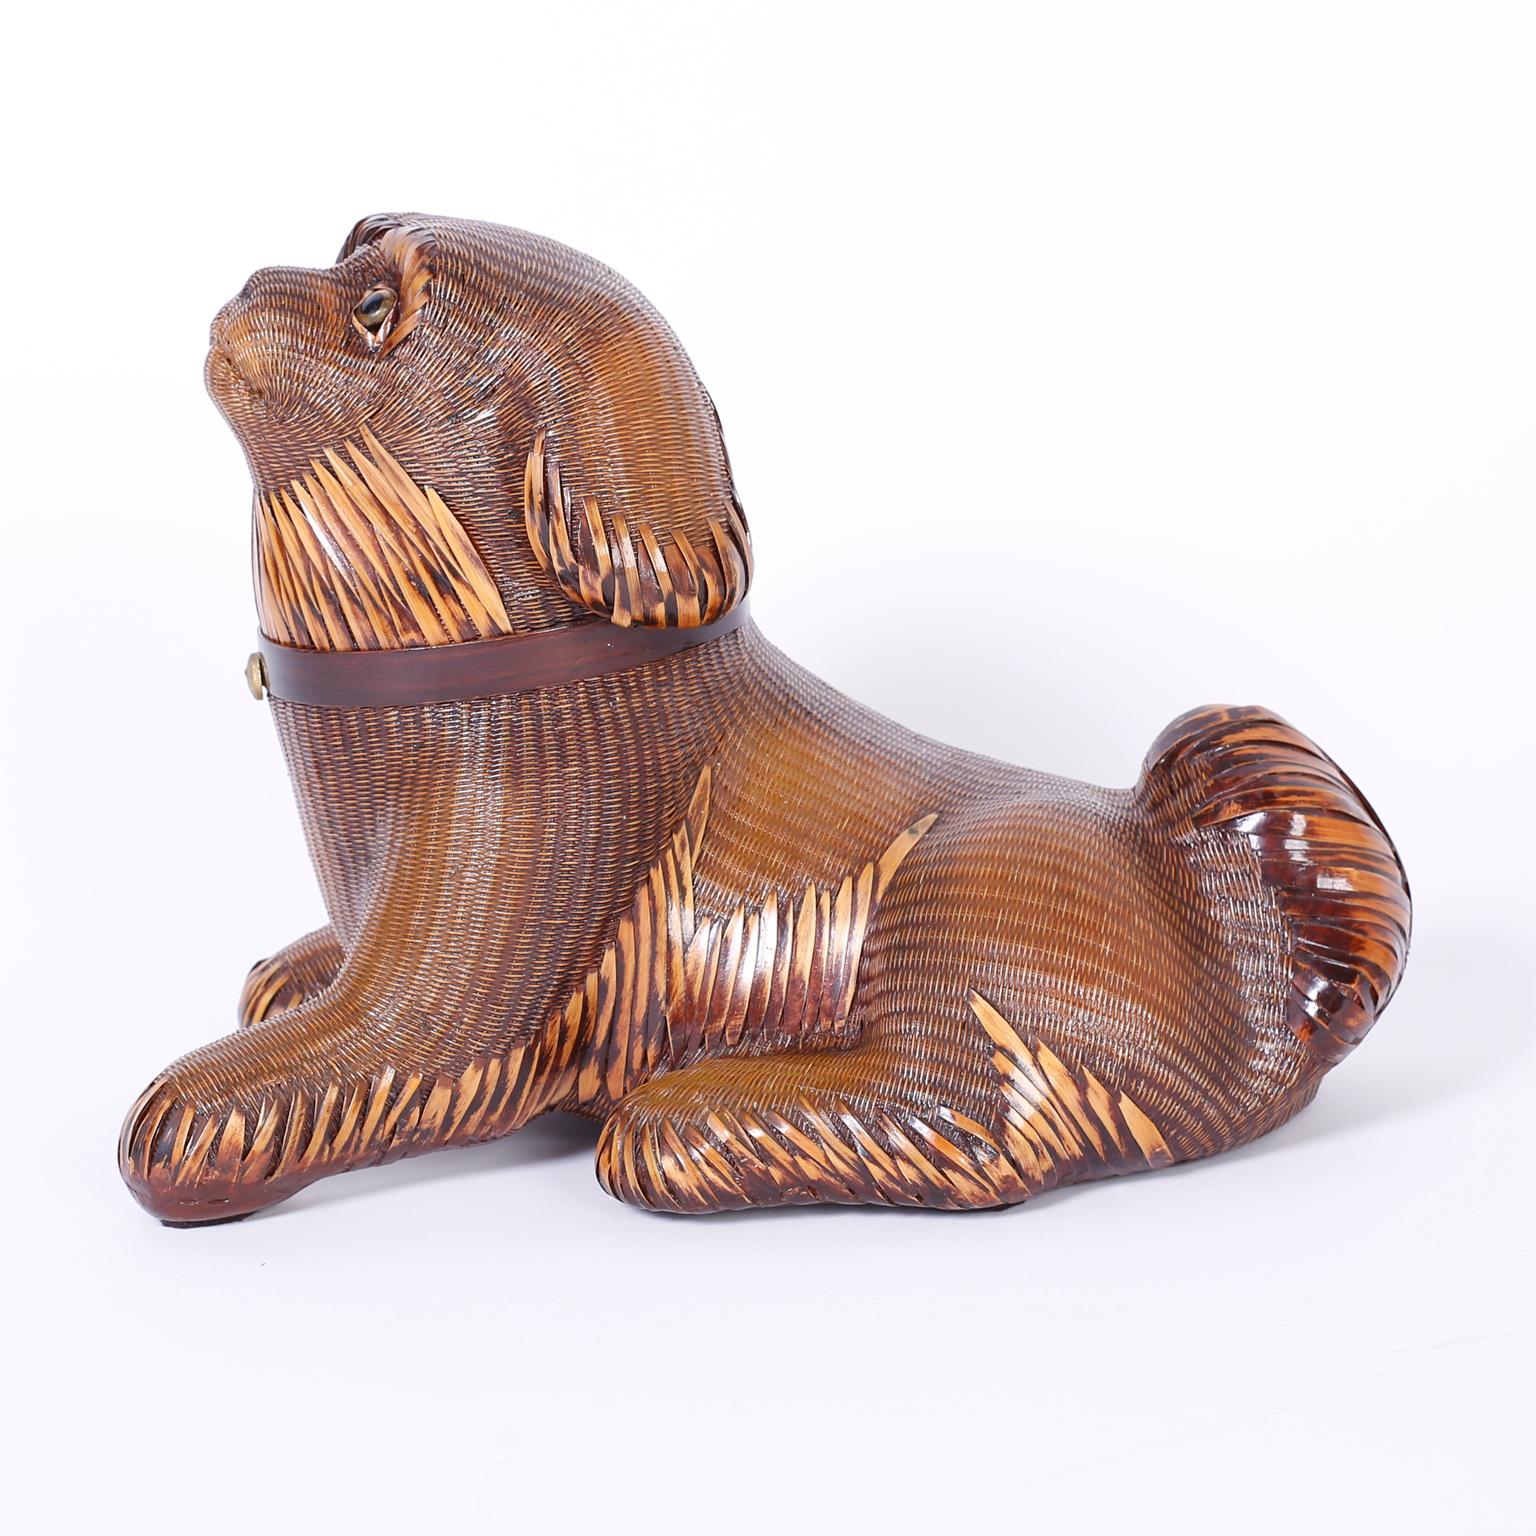 Whimsical vintage Chinese dog box from the famed Shanghai collection, ambitiously crafted in wicker and reed with a removable head and plenty of decorative doggy appeal.